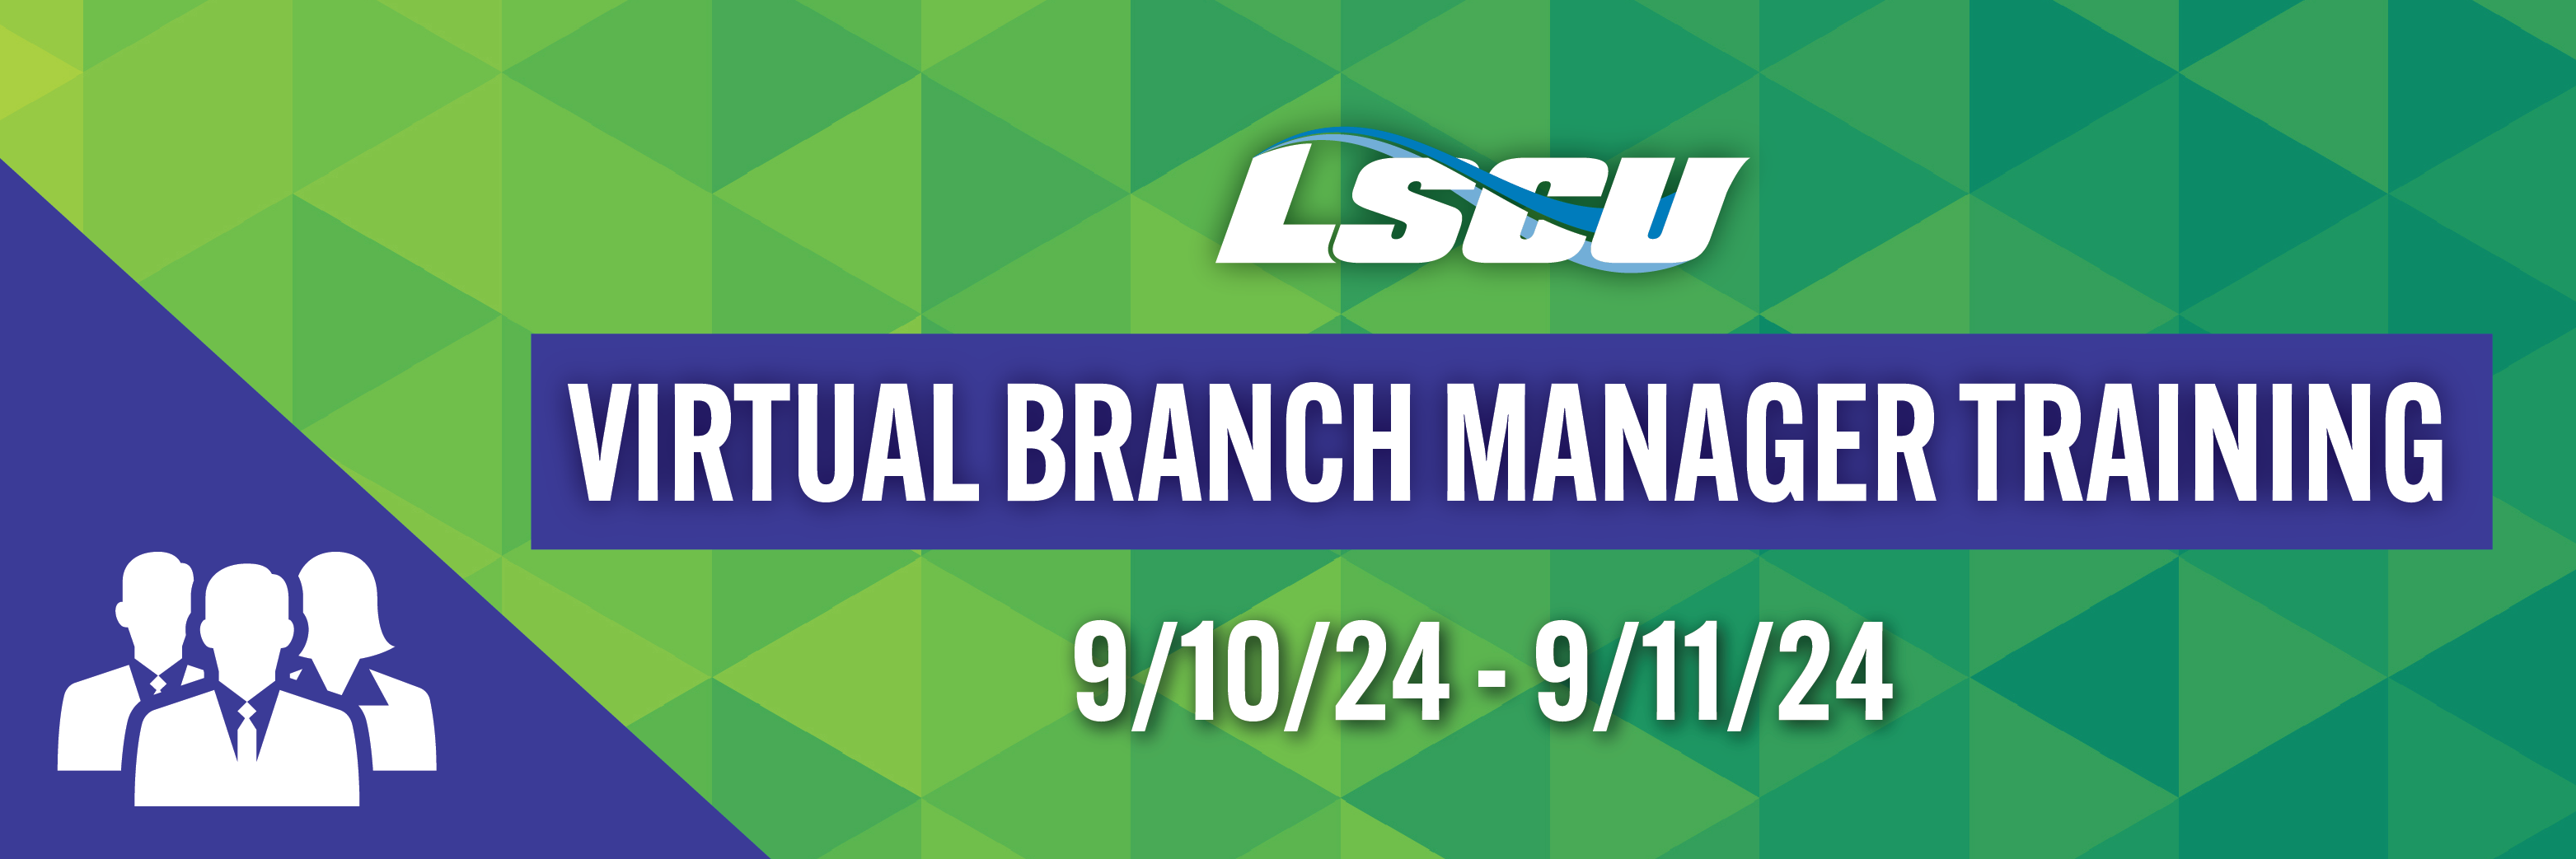 Virtual Branch Manager Training Fall